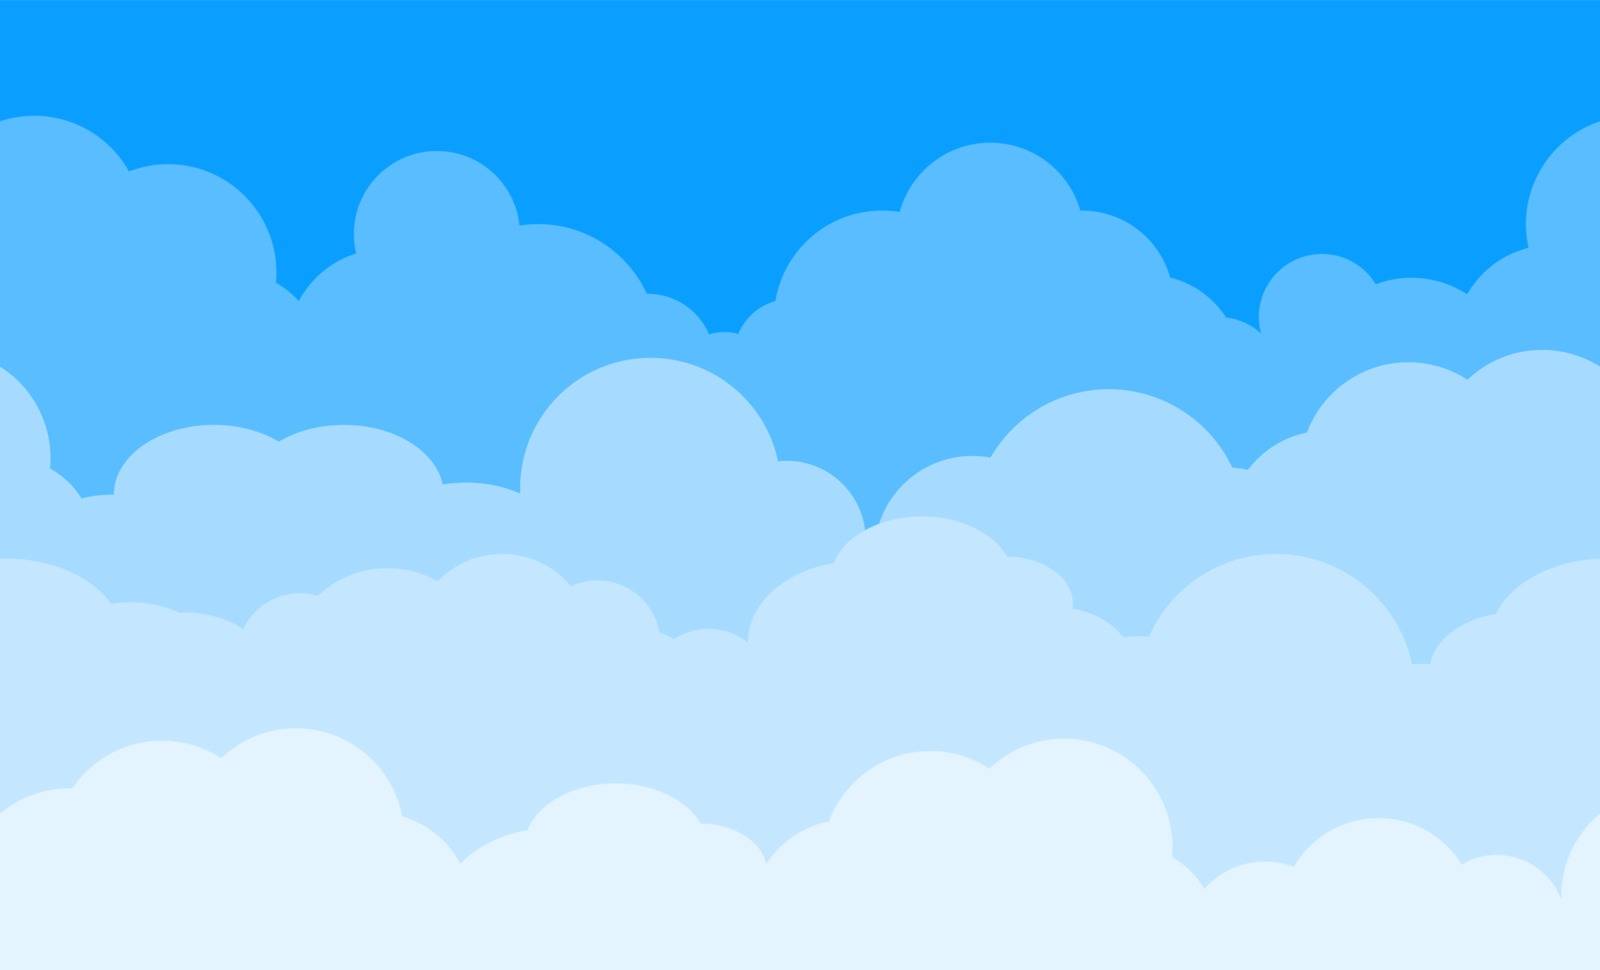 Cloud pattern. Blue sky with clouds. Cartoon cloudscape vector background